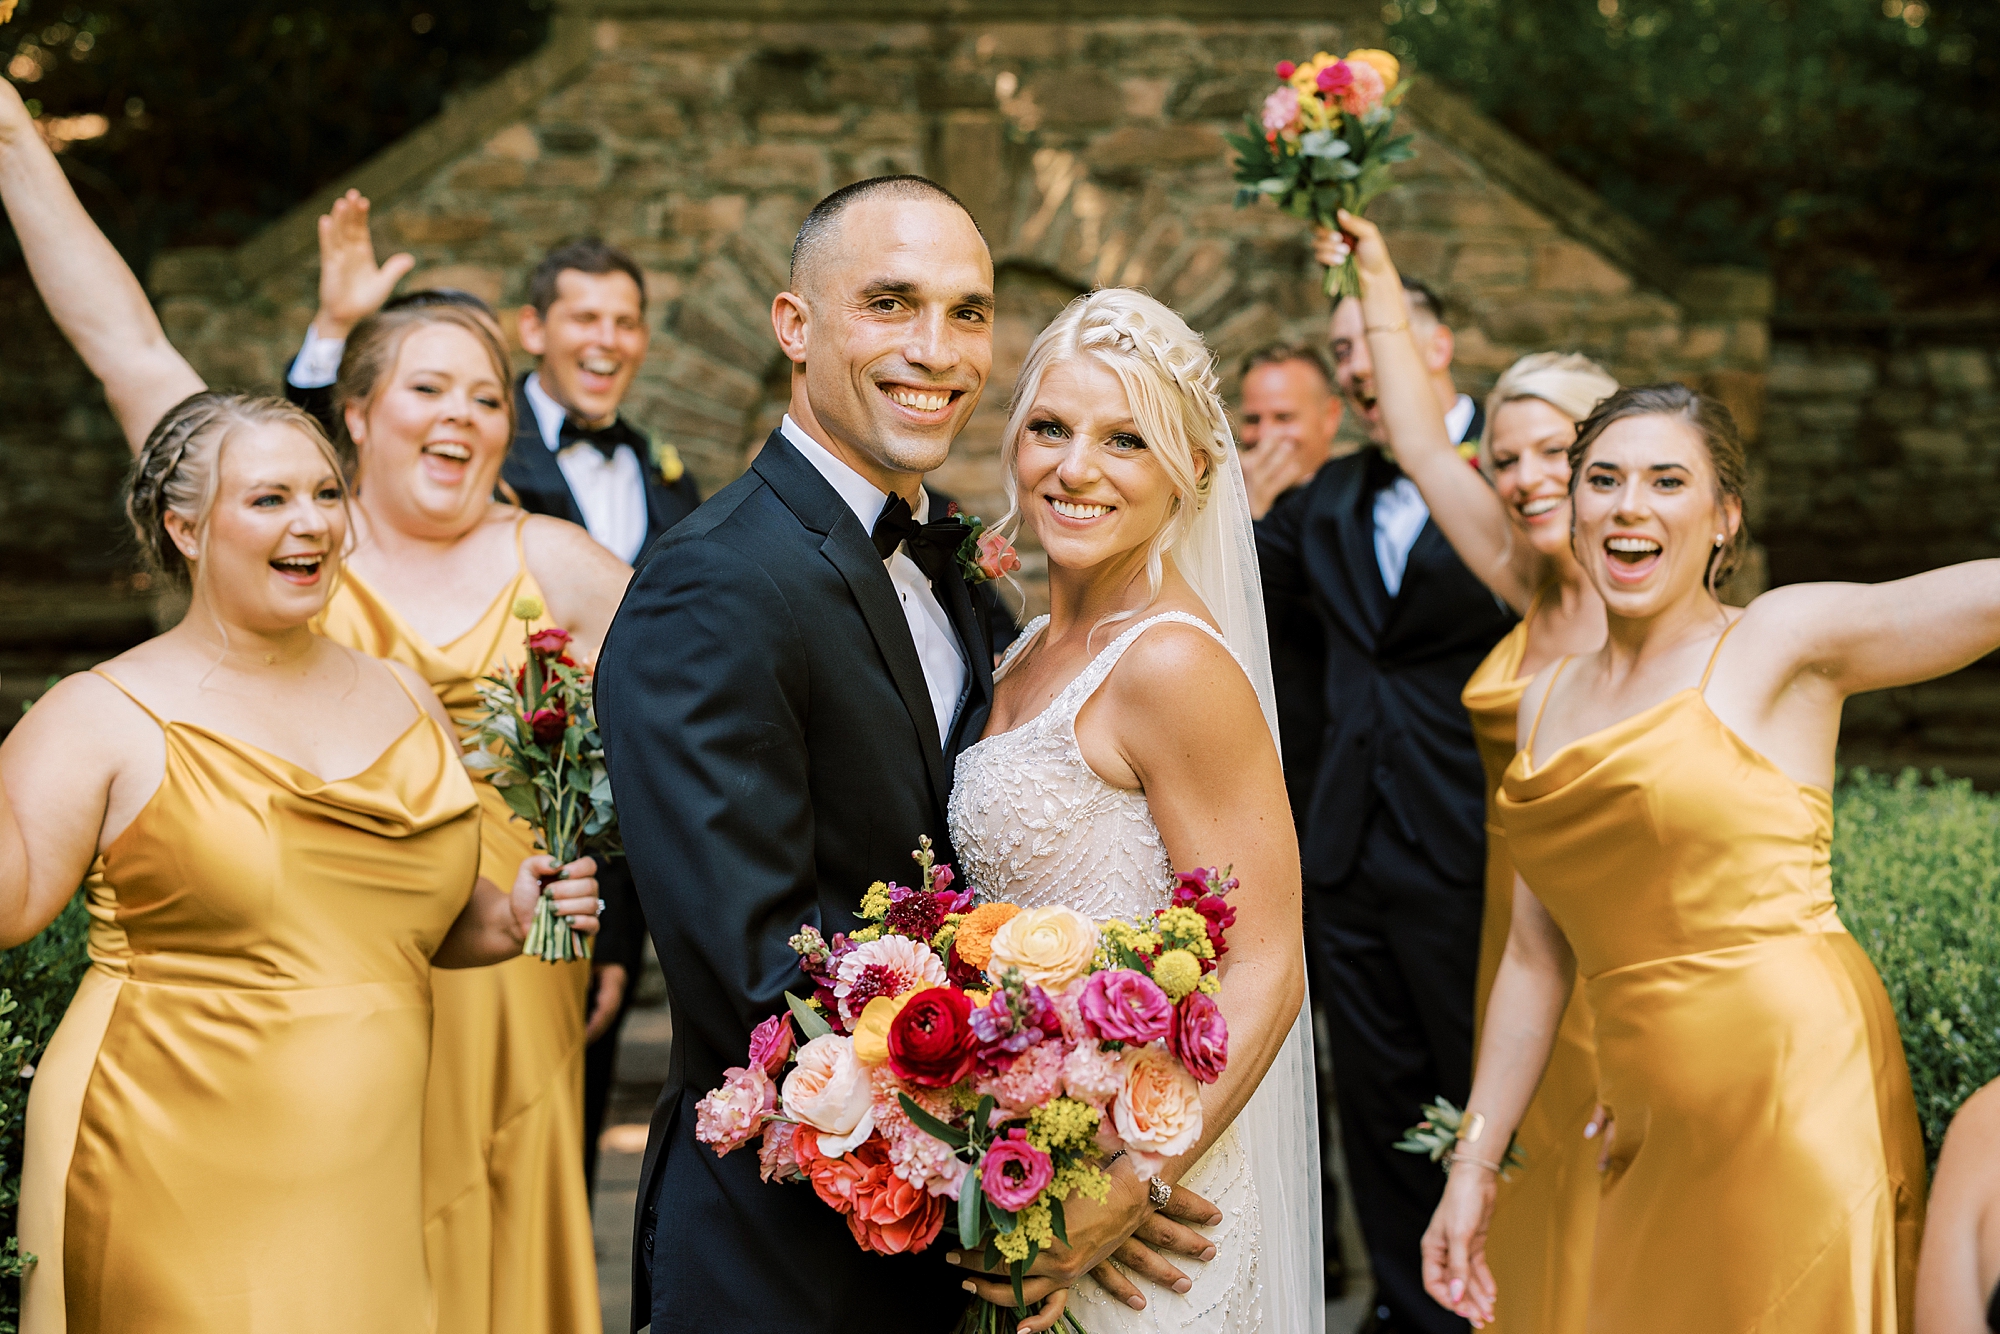 bride and groom hug with wedding party in gold and black attire behind them 